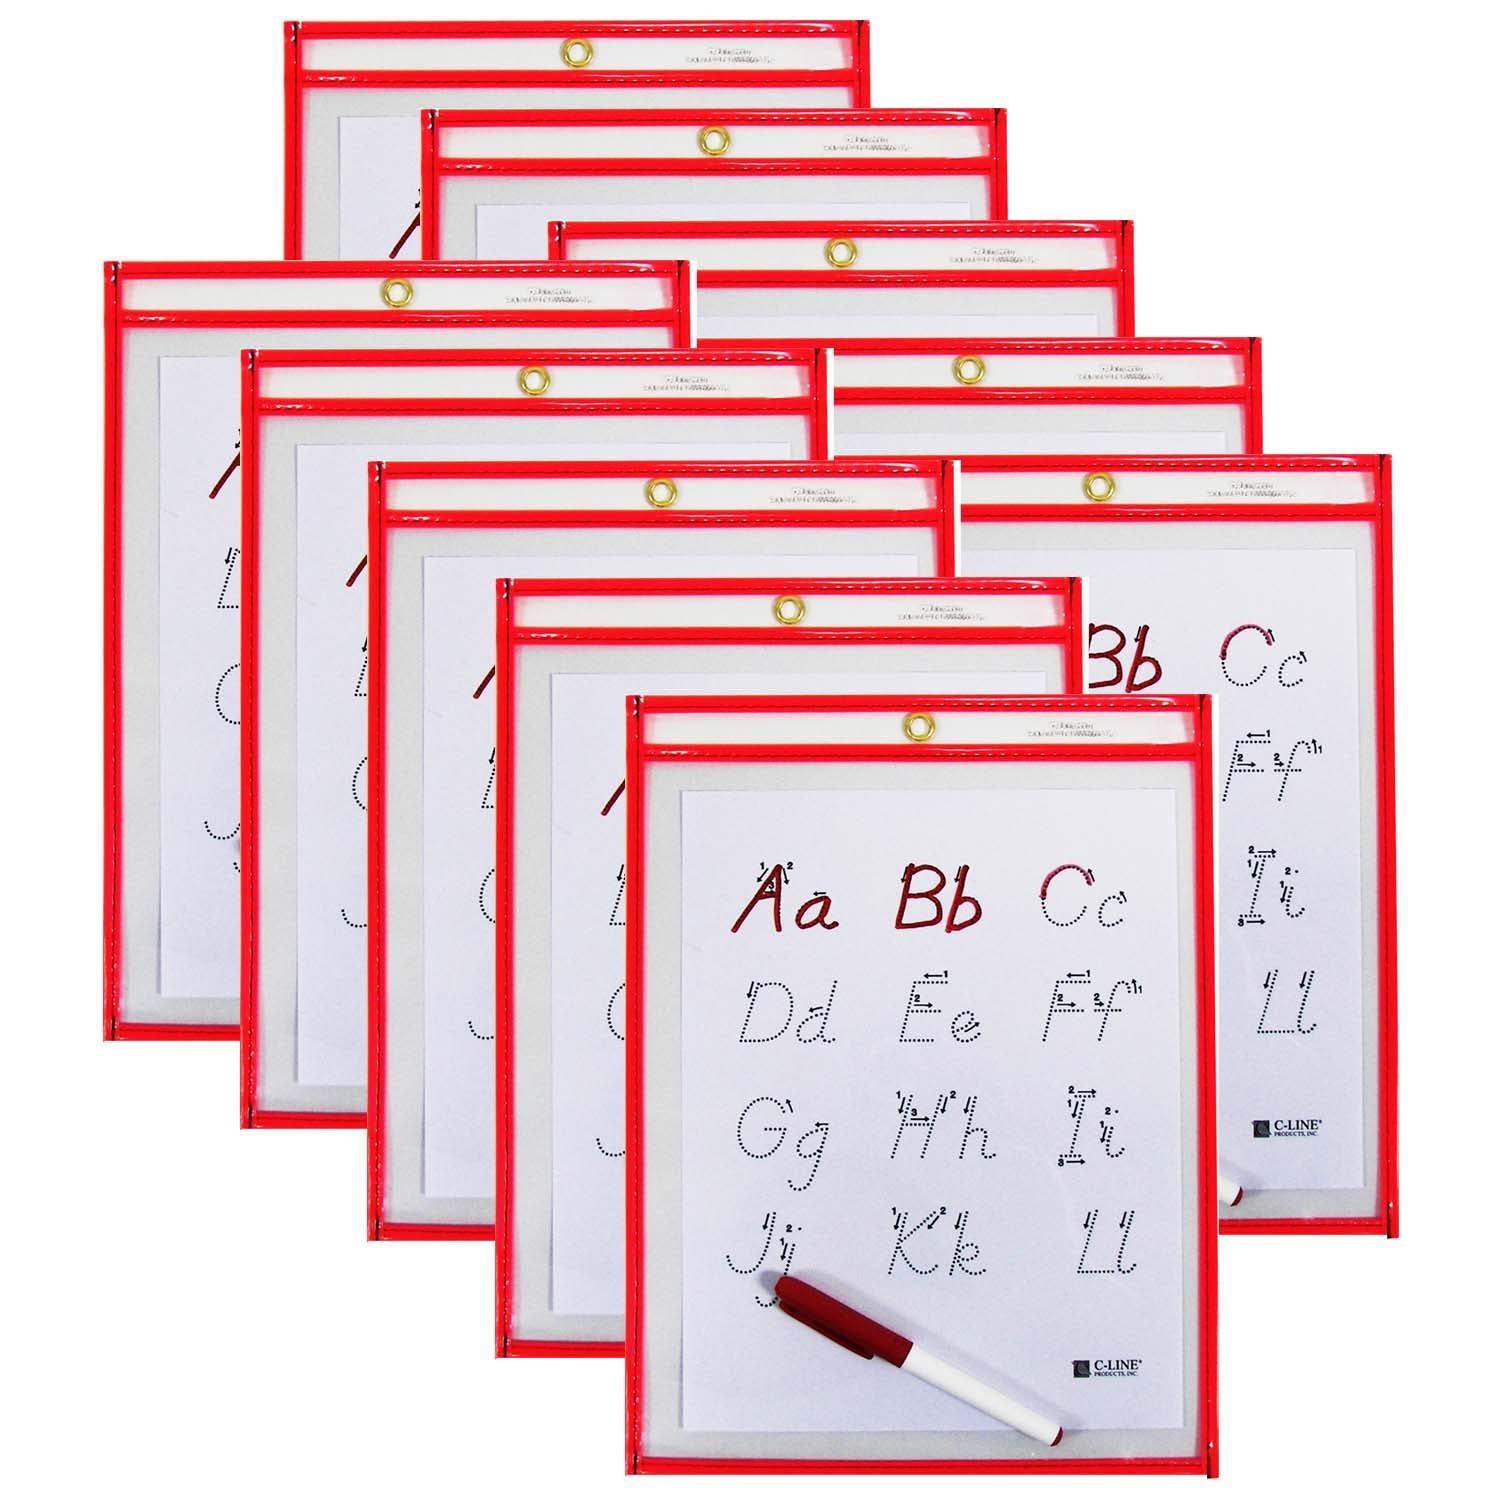 Reusable Dry Erase Pocket - Study Aid, Neon Red, 9" x 12", Pack of 10 - A1 School Supplies